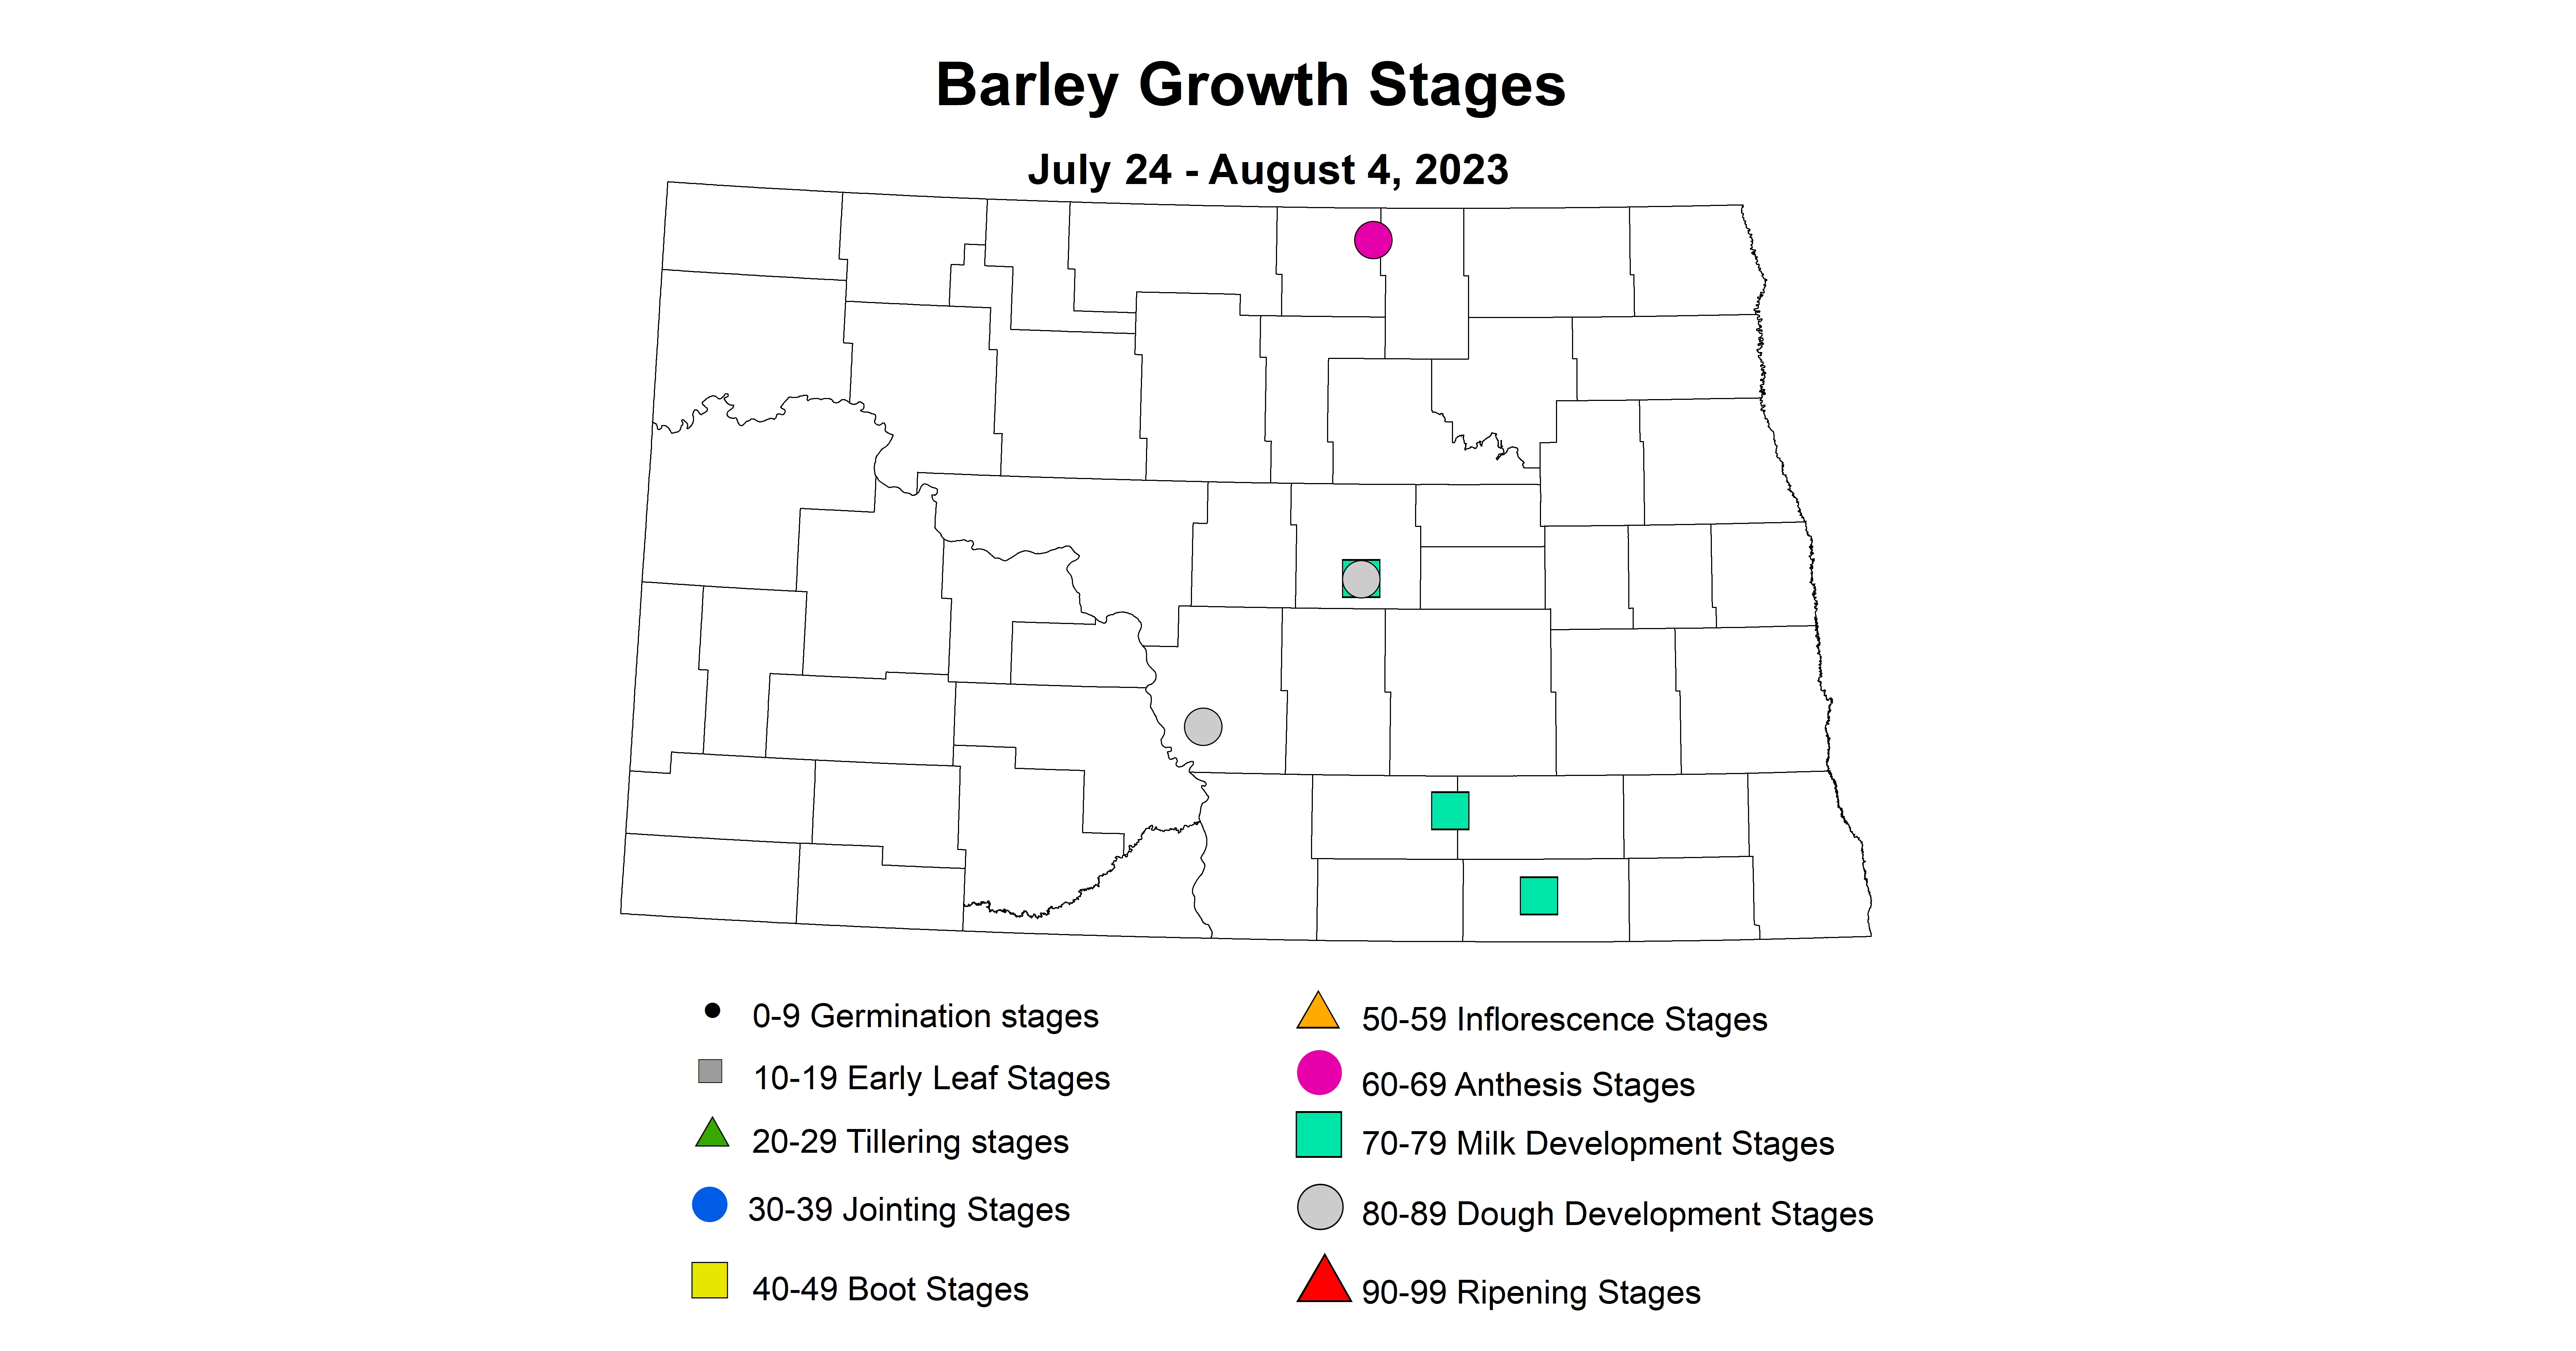 barley growth stages 7.24-8.4 2023